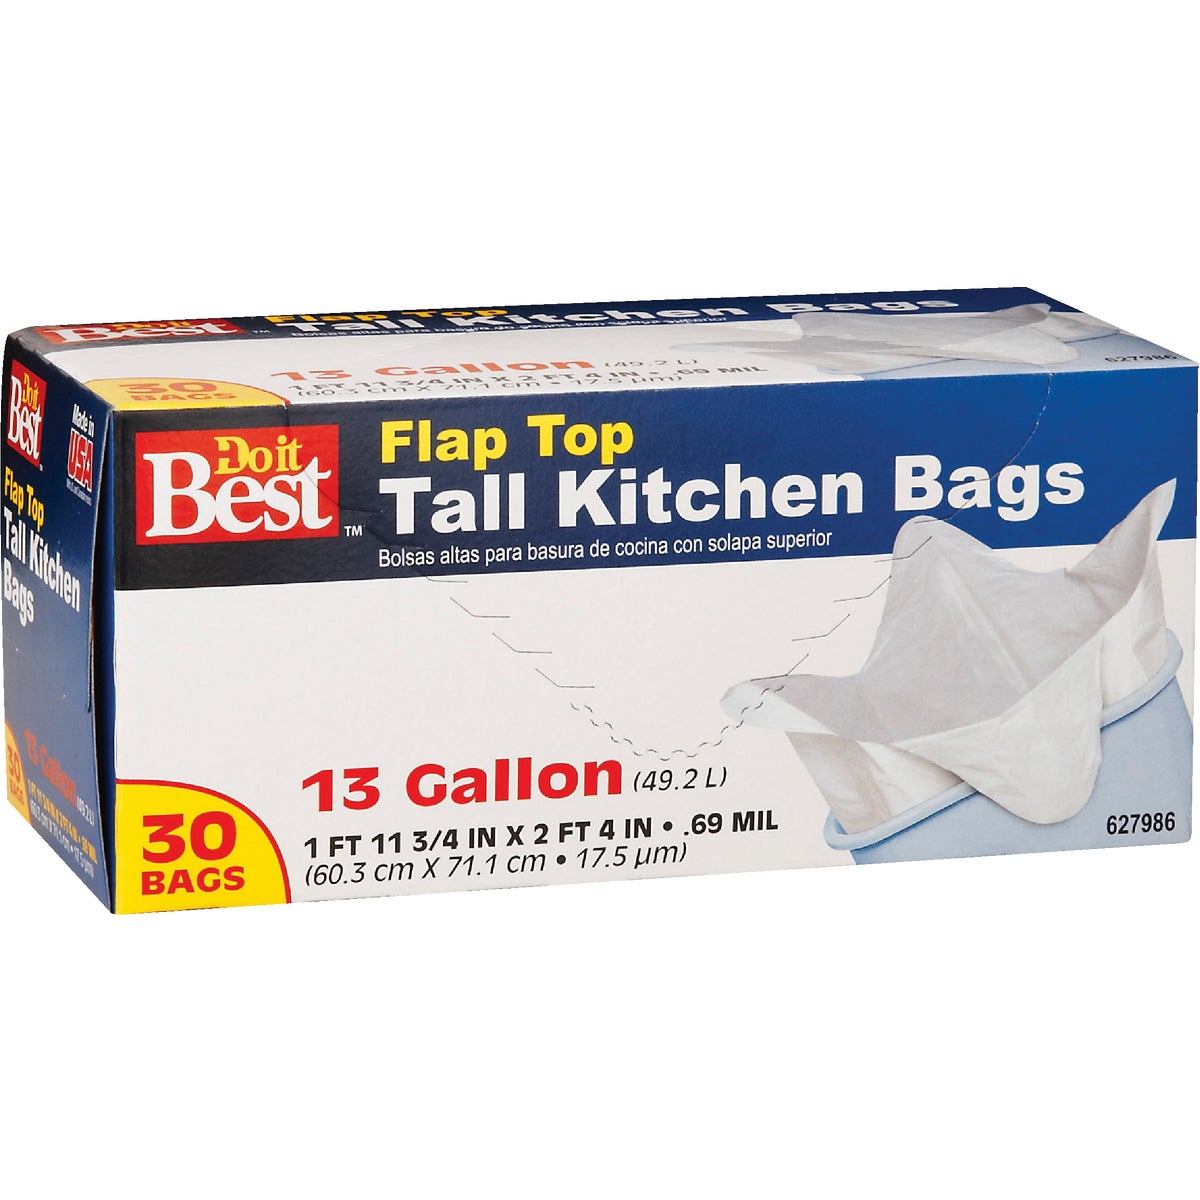 Item 627986, Tall kitchen trash bag fits perfectly into a 13 Gal. trash can.